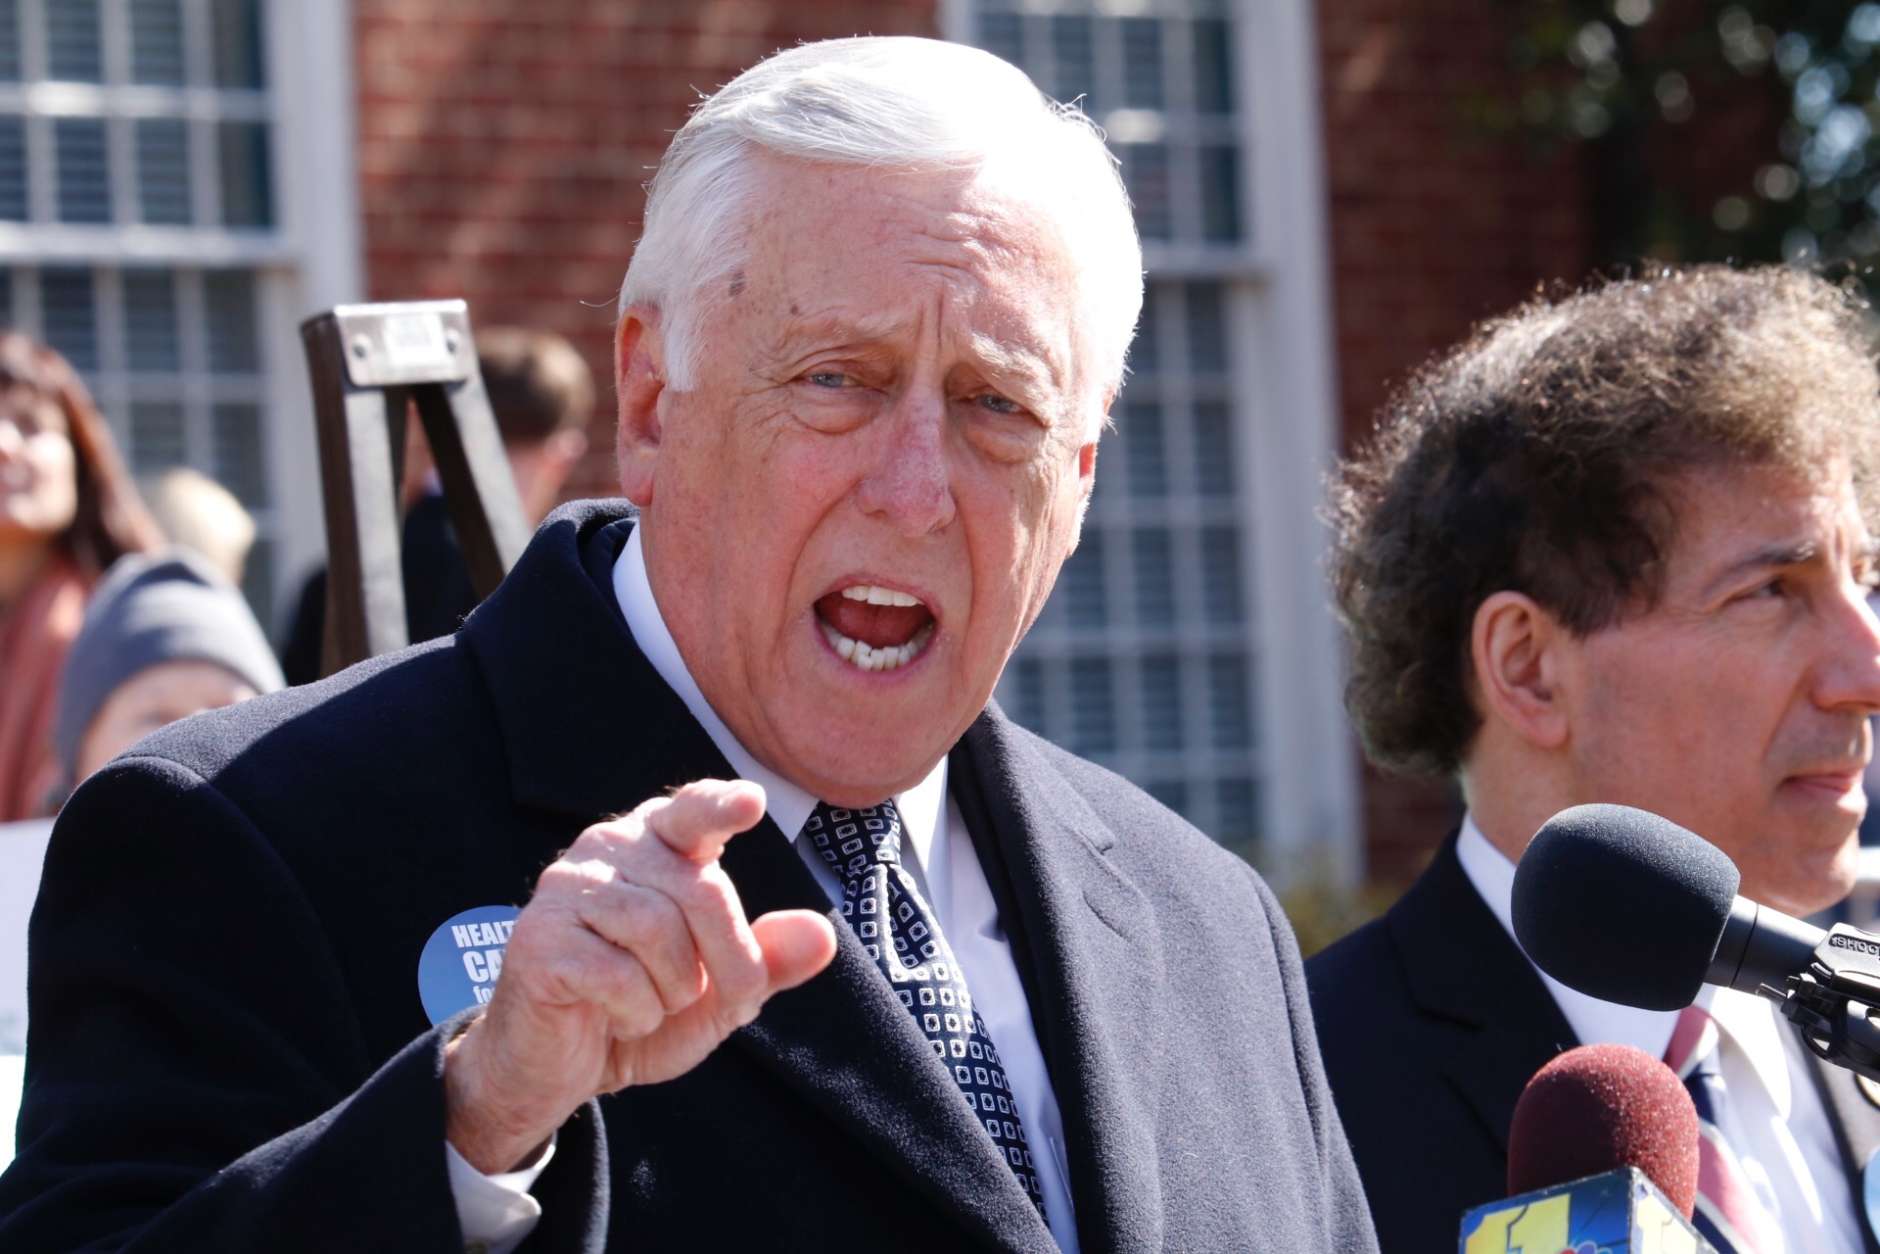 Rep. Steny Hoyer, D-Maryland, at a rally in front of the governor's mansion in Annapolis on Monday. (WTOP/Kate Ryan)